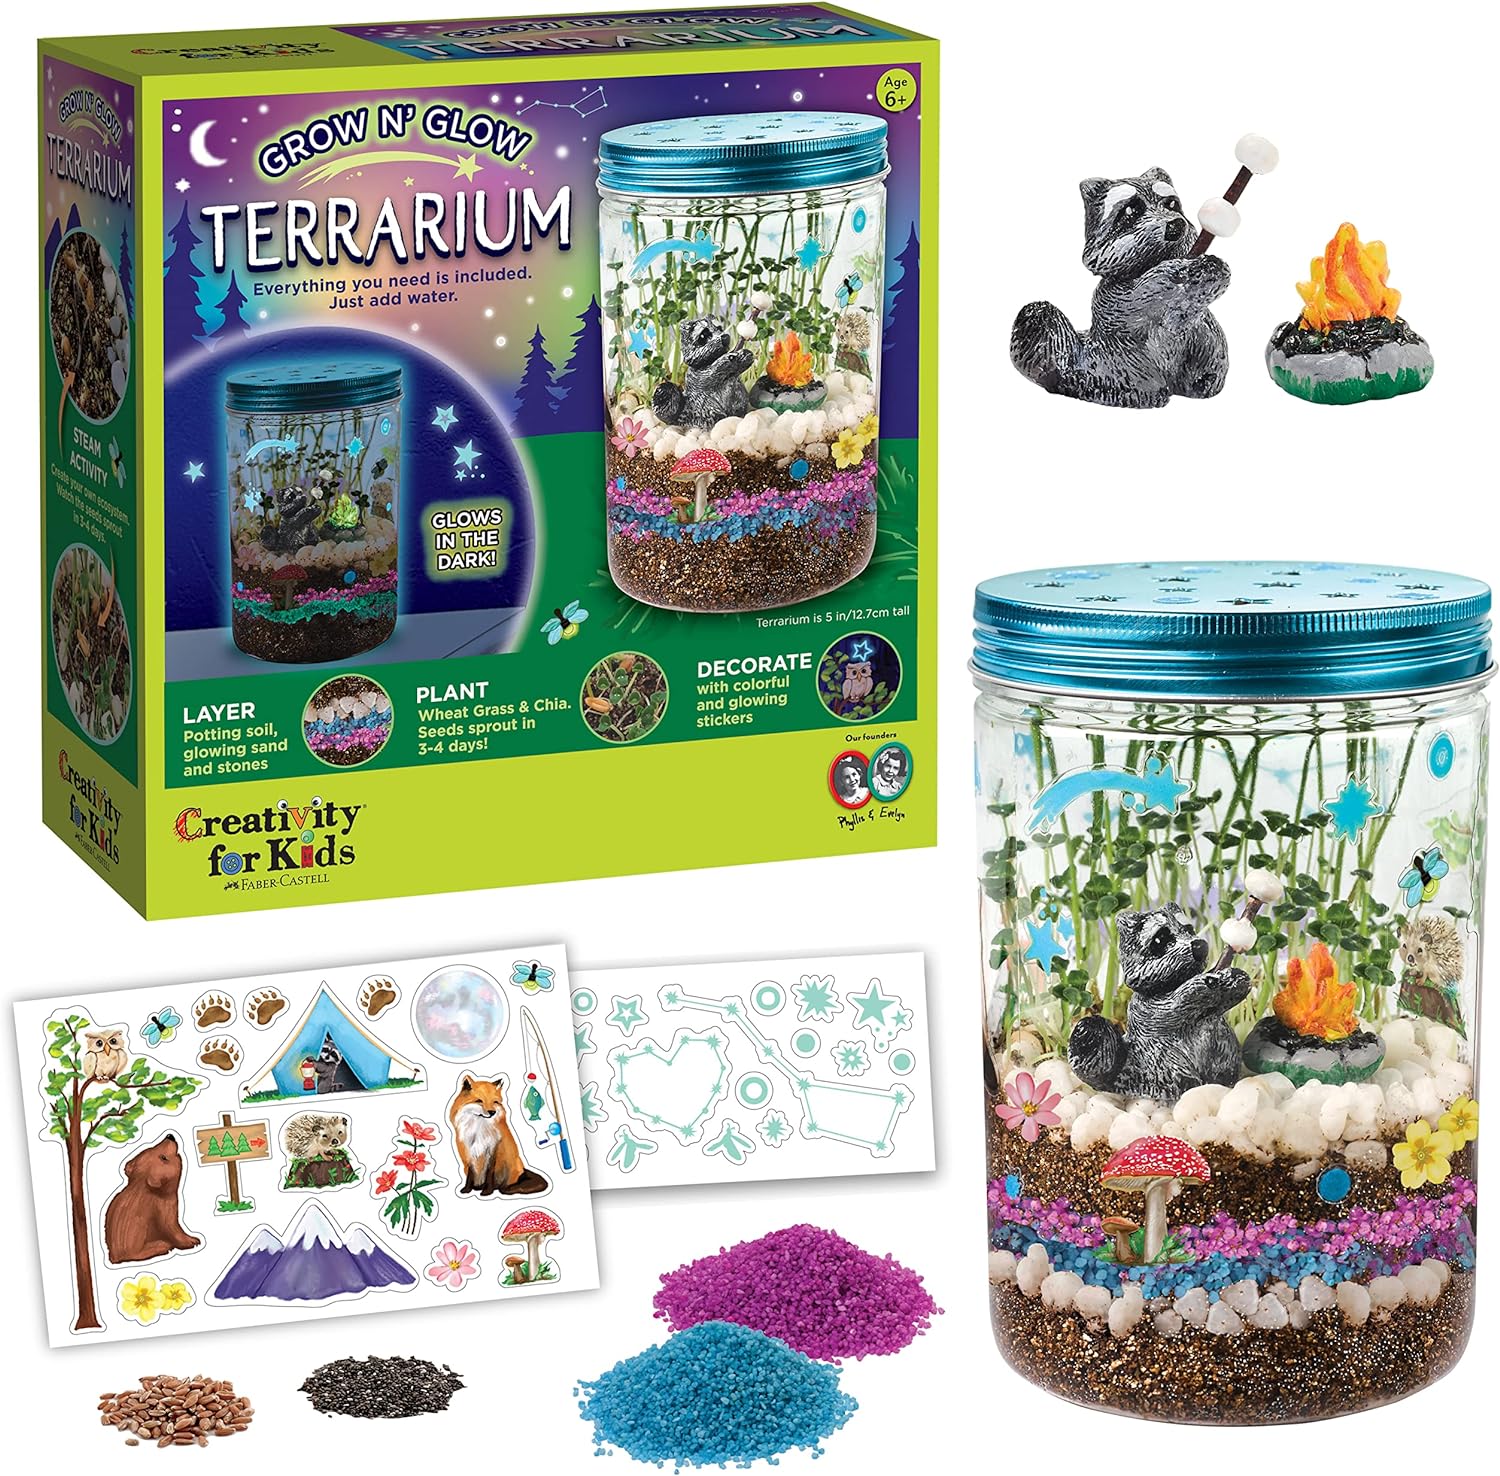 Creativity for Kids Grow 'n Glow Terrarium Kit for Kids Educational Science Kids Ages 6-8+, Craft and STEM Projects